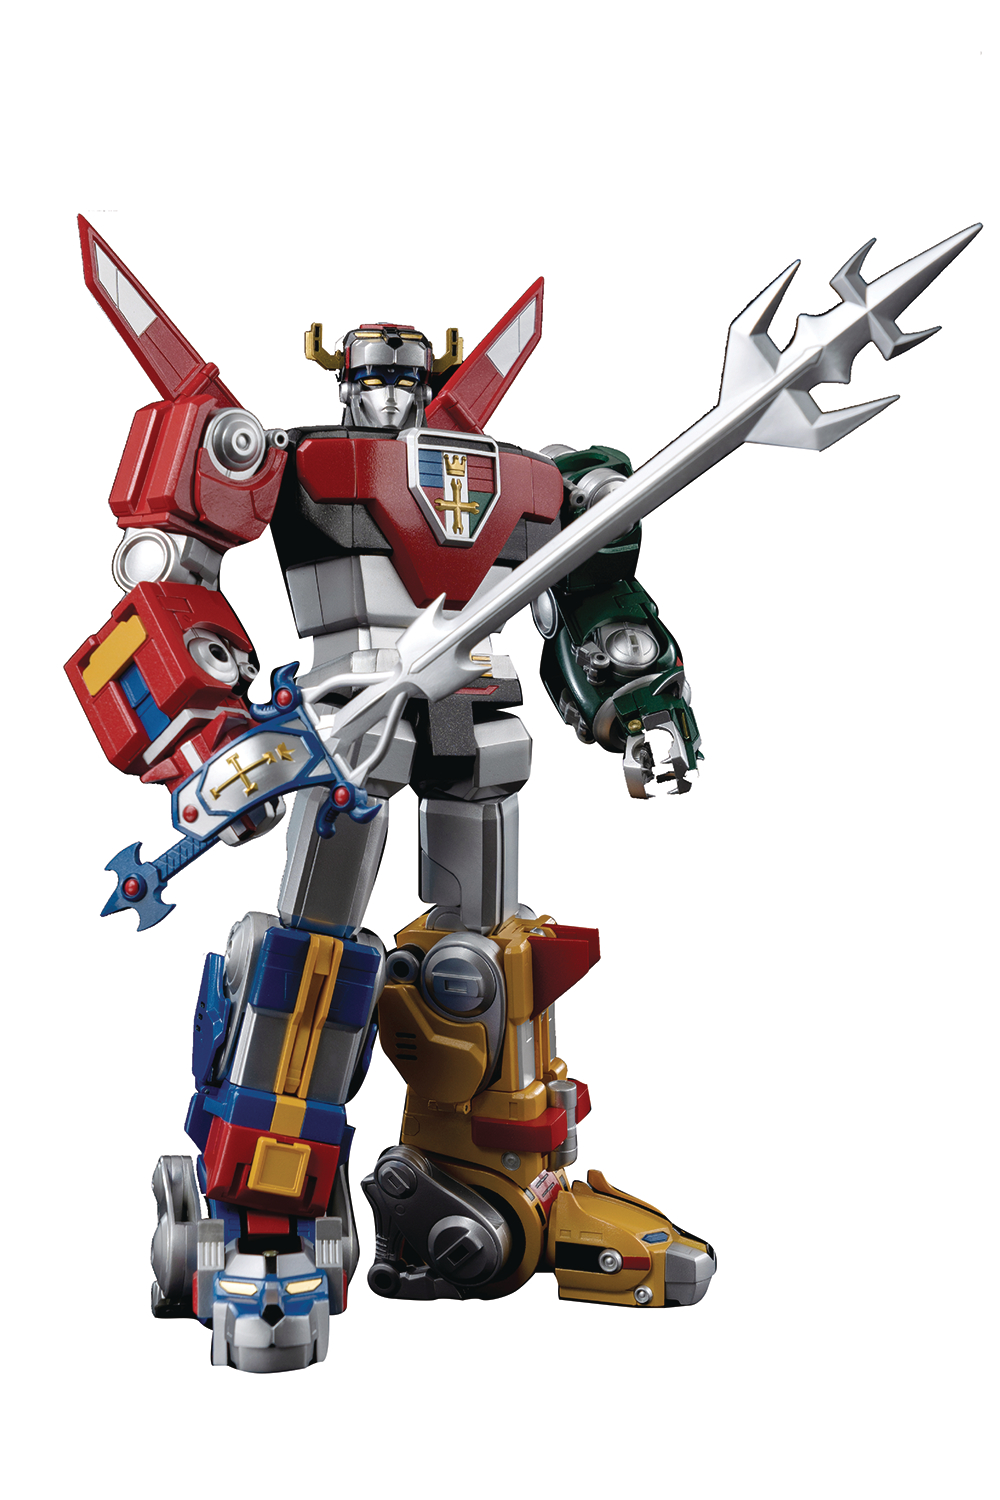 Voltron Defender of the Universe Robo-Duo Voltron Collected Figure